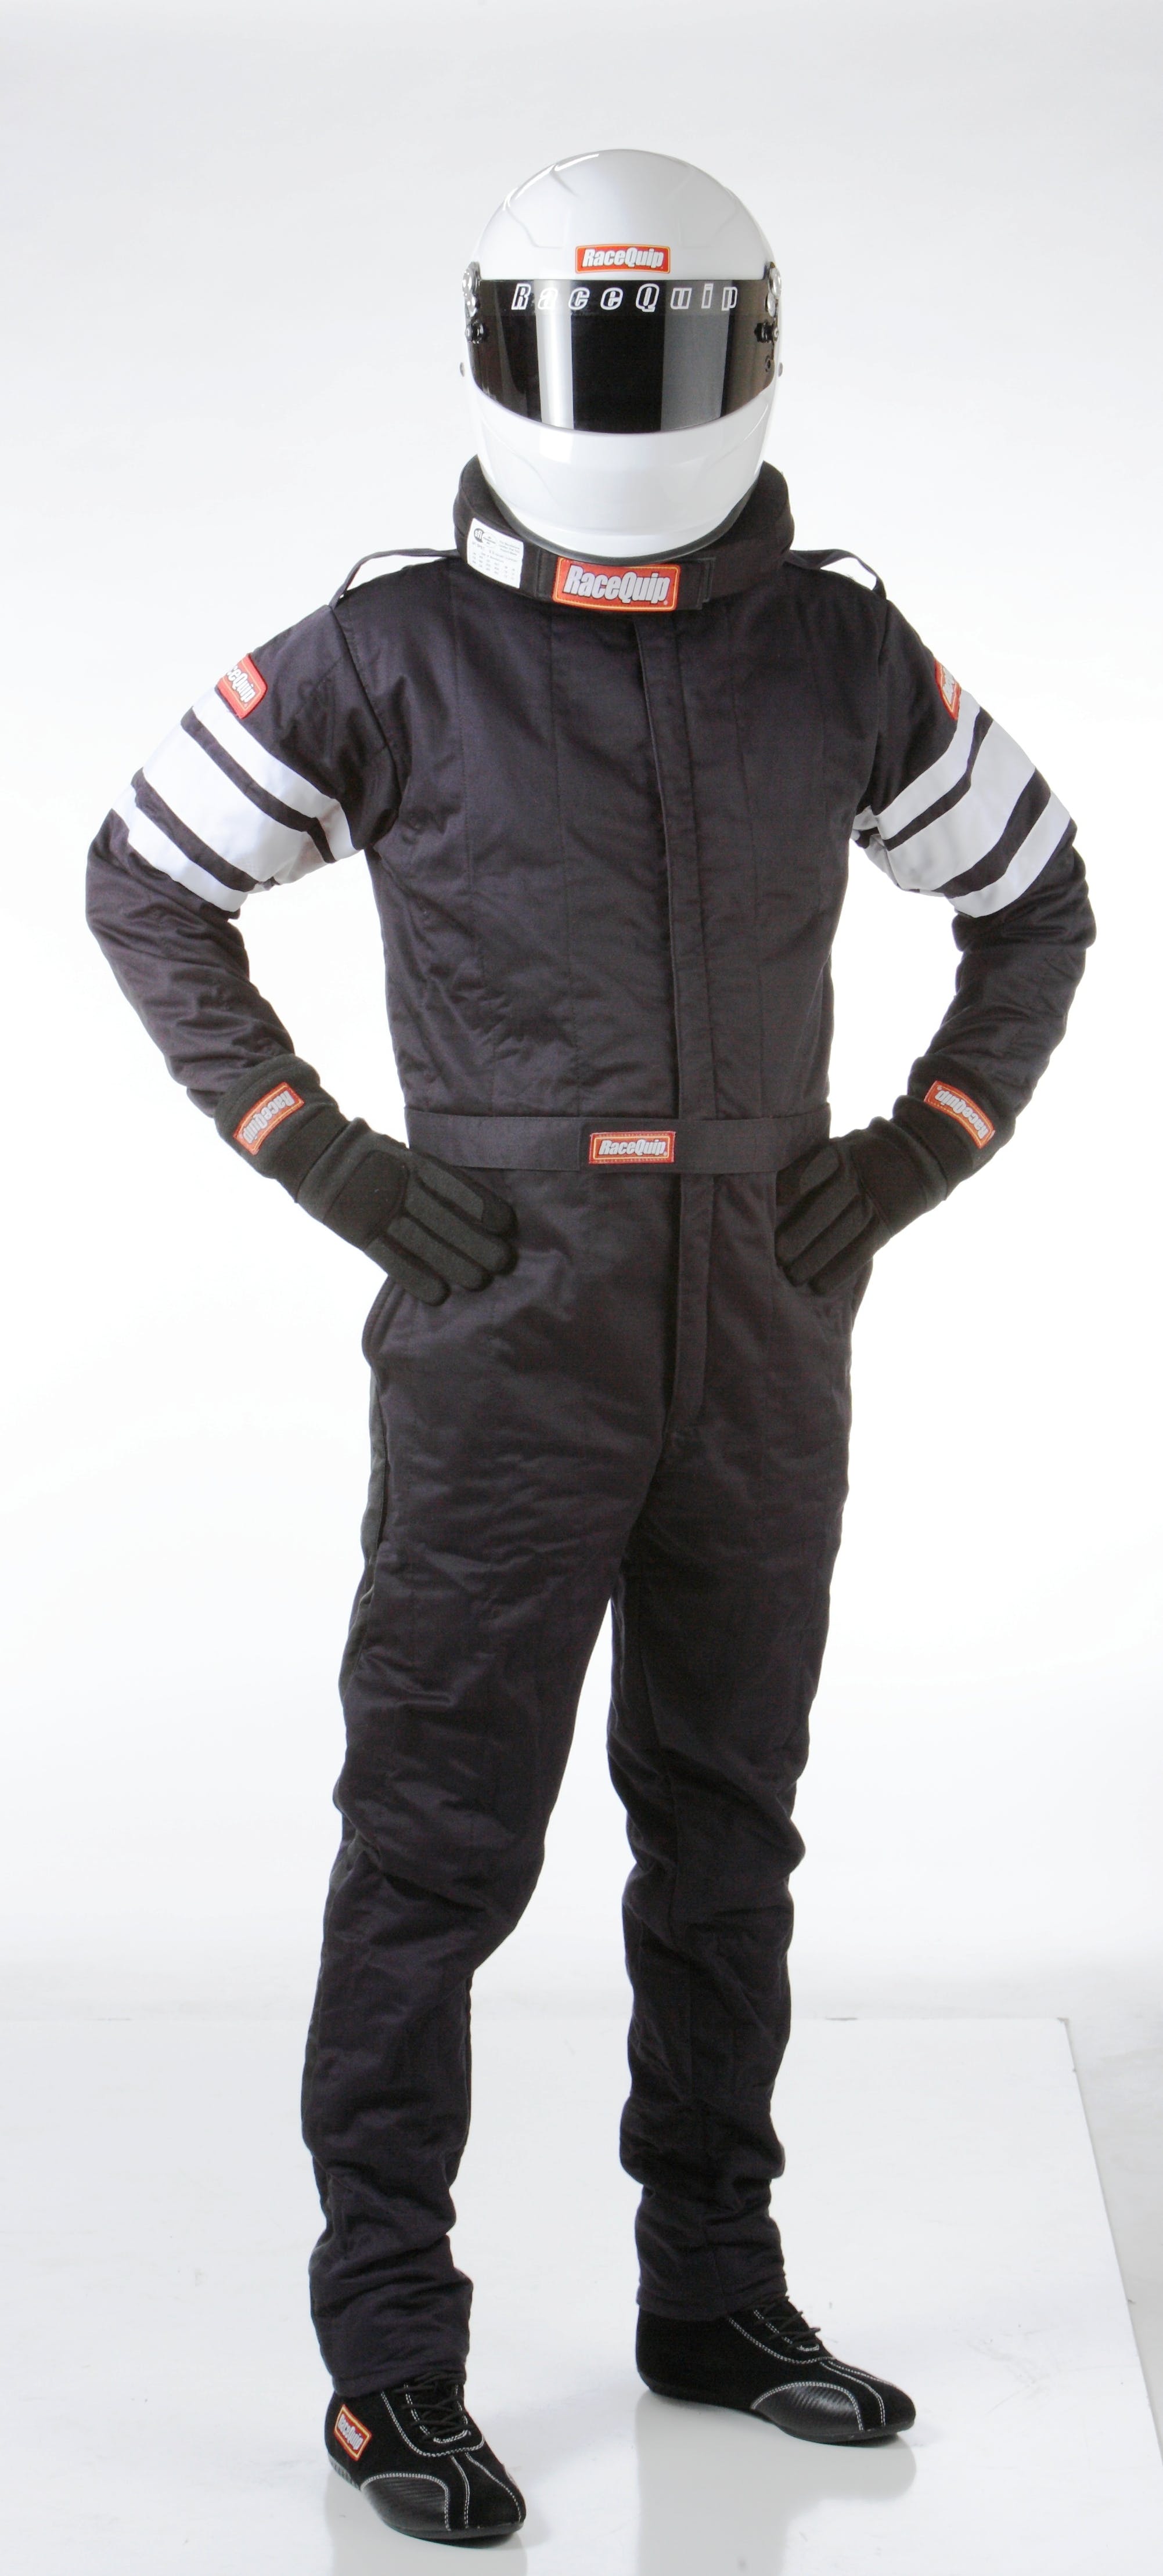 RaceQuip 120005 SFI-5 Pyrovatex One-Piece Multi-Layer Racing Fire Suit (Black, Large)